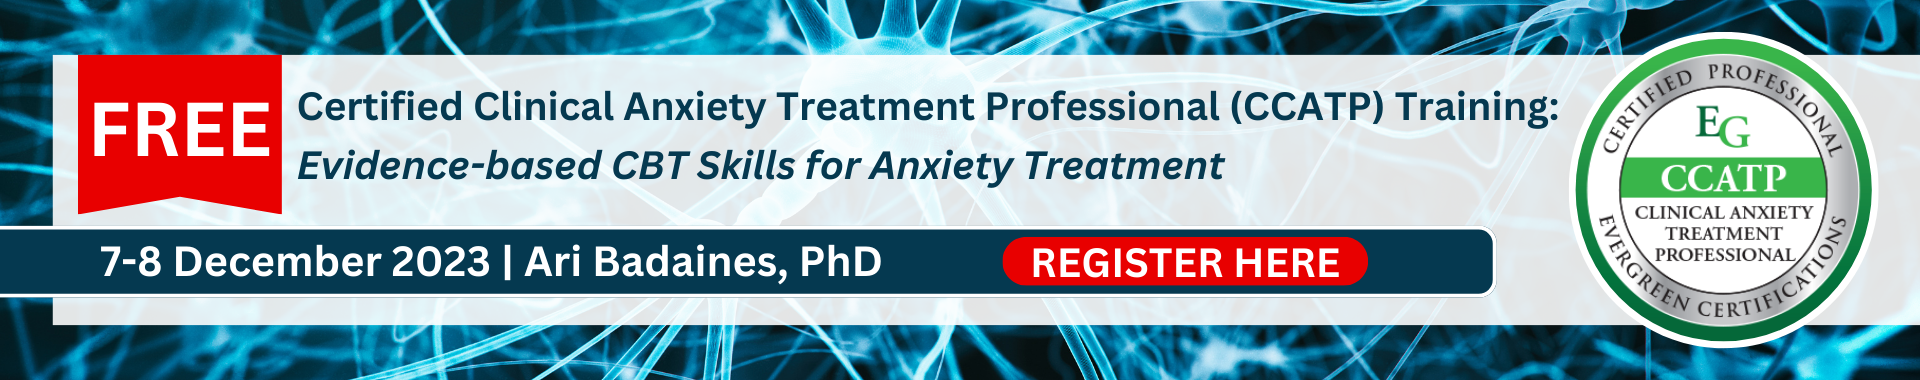 Certified Clinical Anxiety Treatment Professional (CCATP) 	Training: Evidence-based CBT Skills, Strategies & Resources to Help Clients Function in an Uncertain World